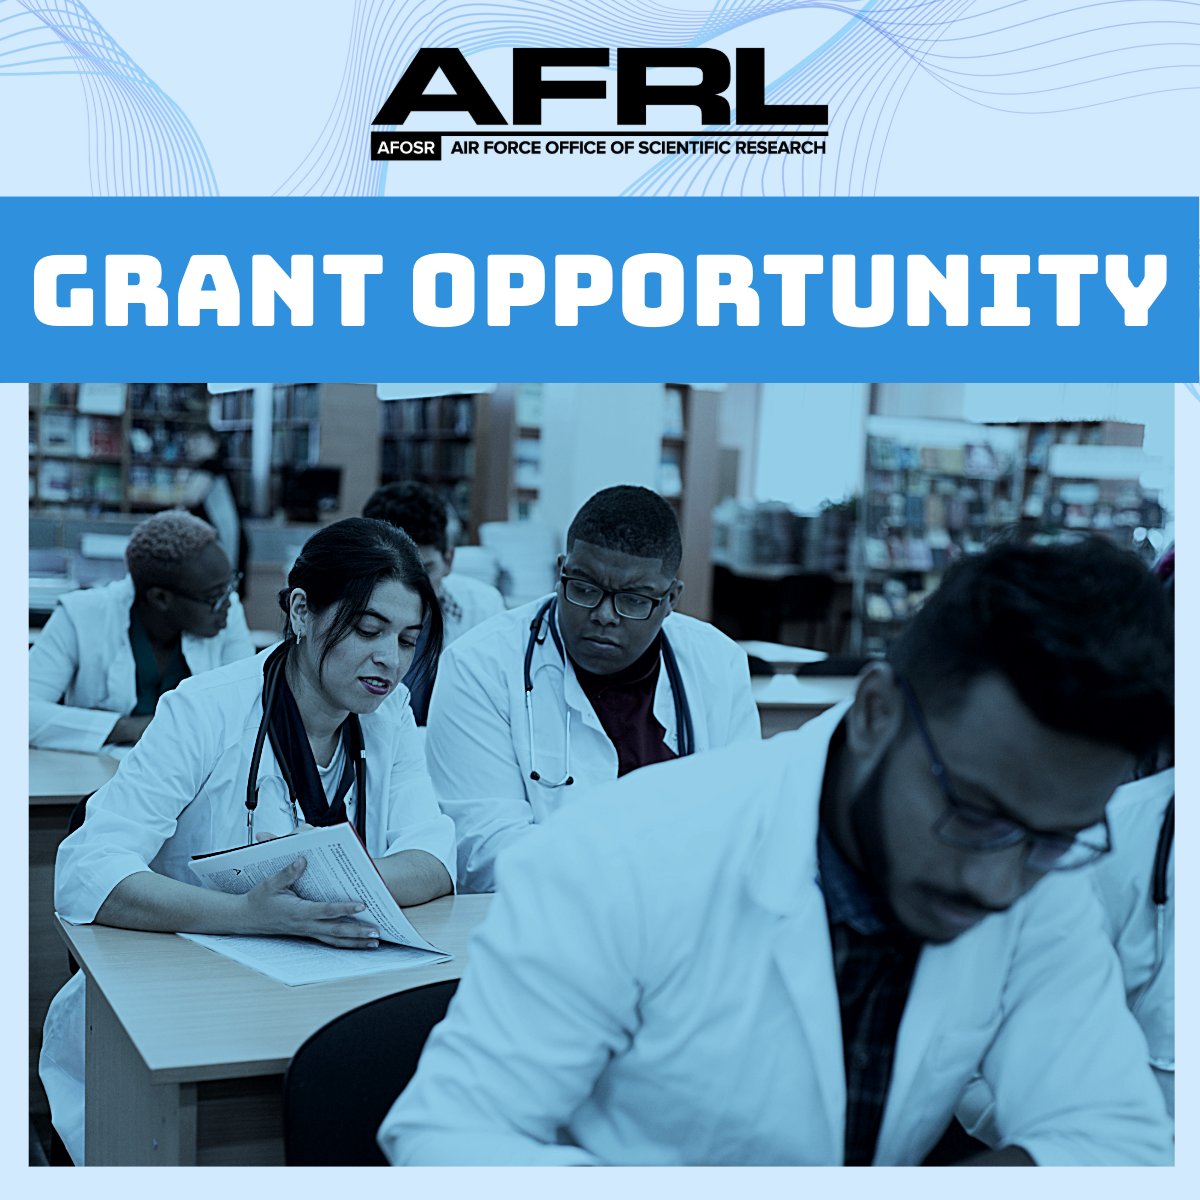 AFOSR is seeking early-career scientists & engineers pushing frontiers of basic research! 💻🔬

Up to $450K for 3 yrs
Open to U.S. academics & research orgs

Apply by 6/21: grants.gov/search-results…
#AFOSRYIP #STEM #Grants